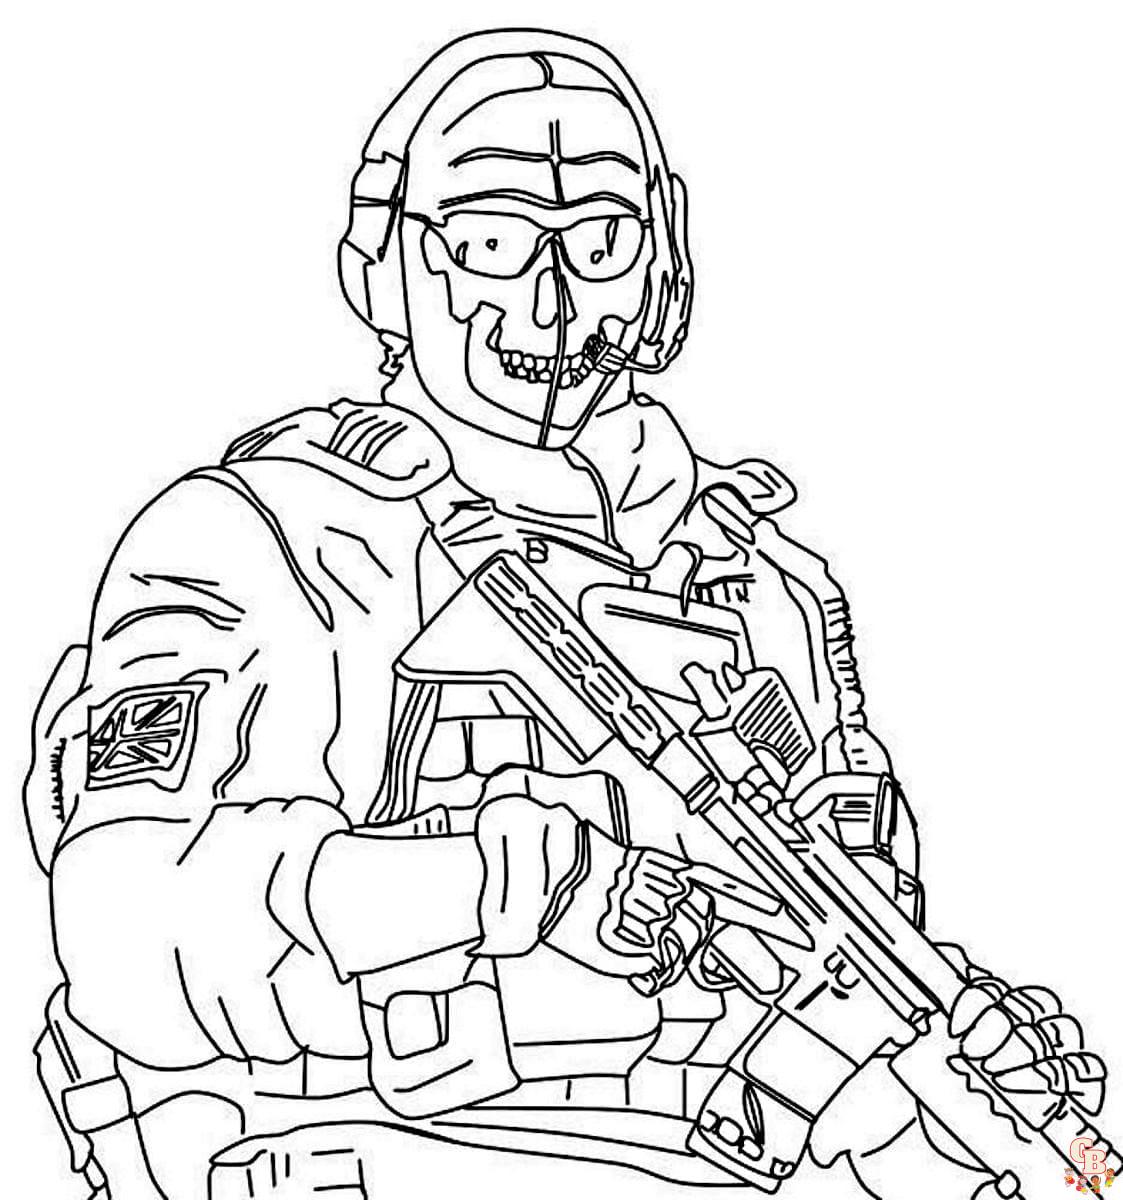 Call of Duty Coloring Pages